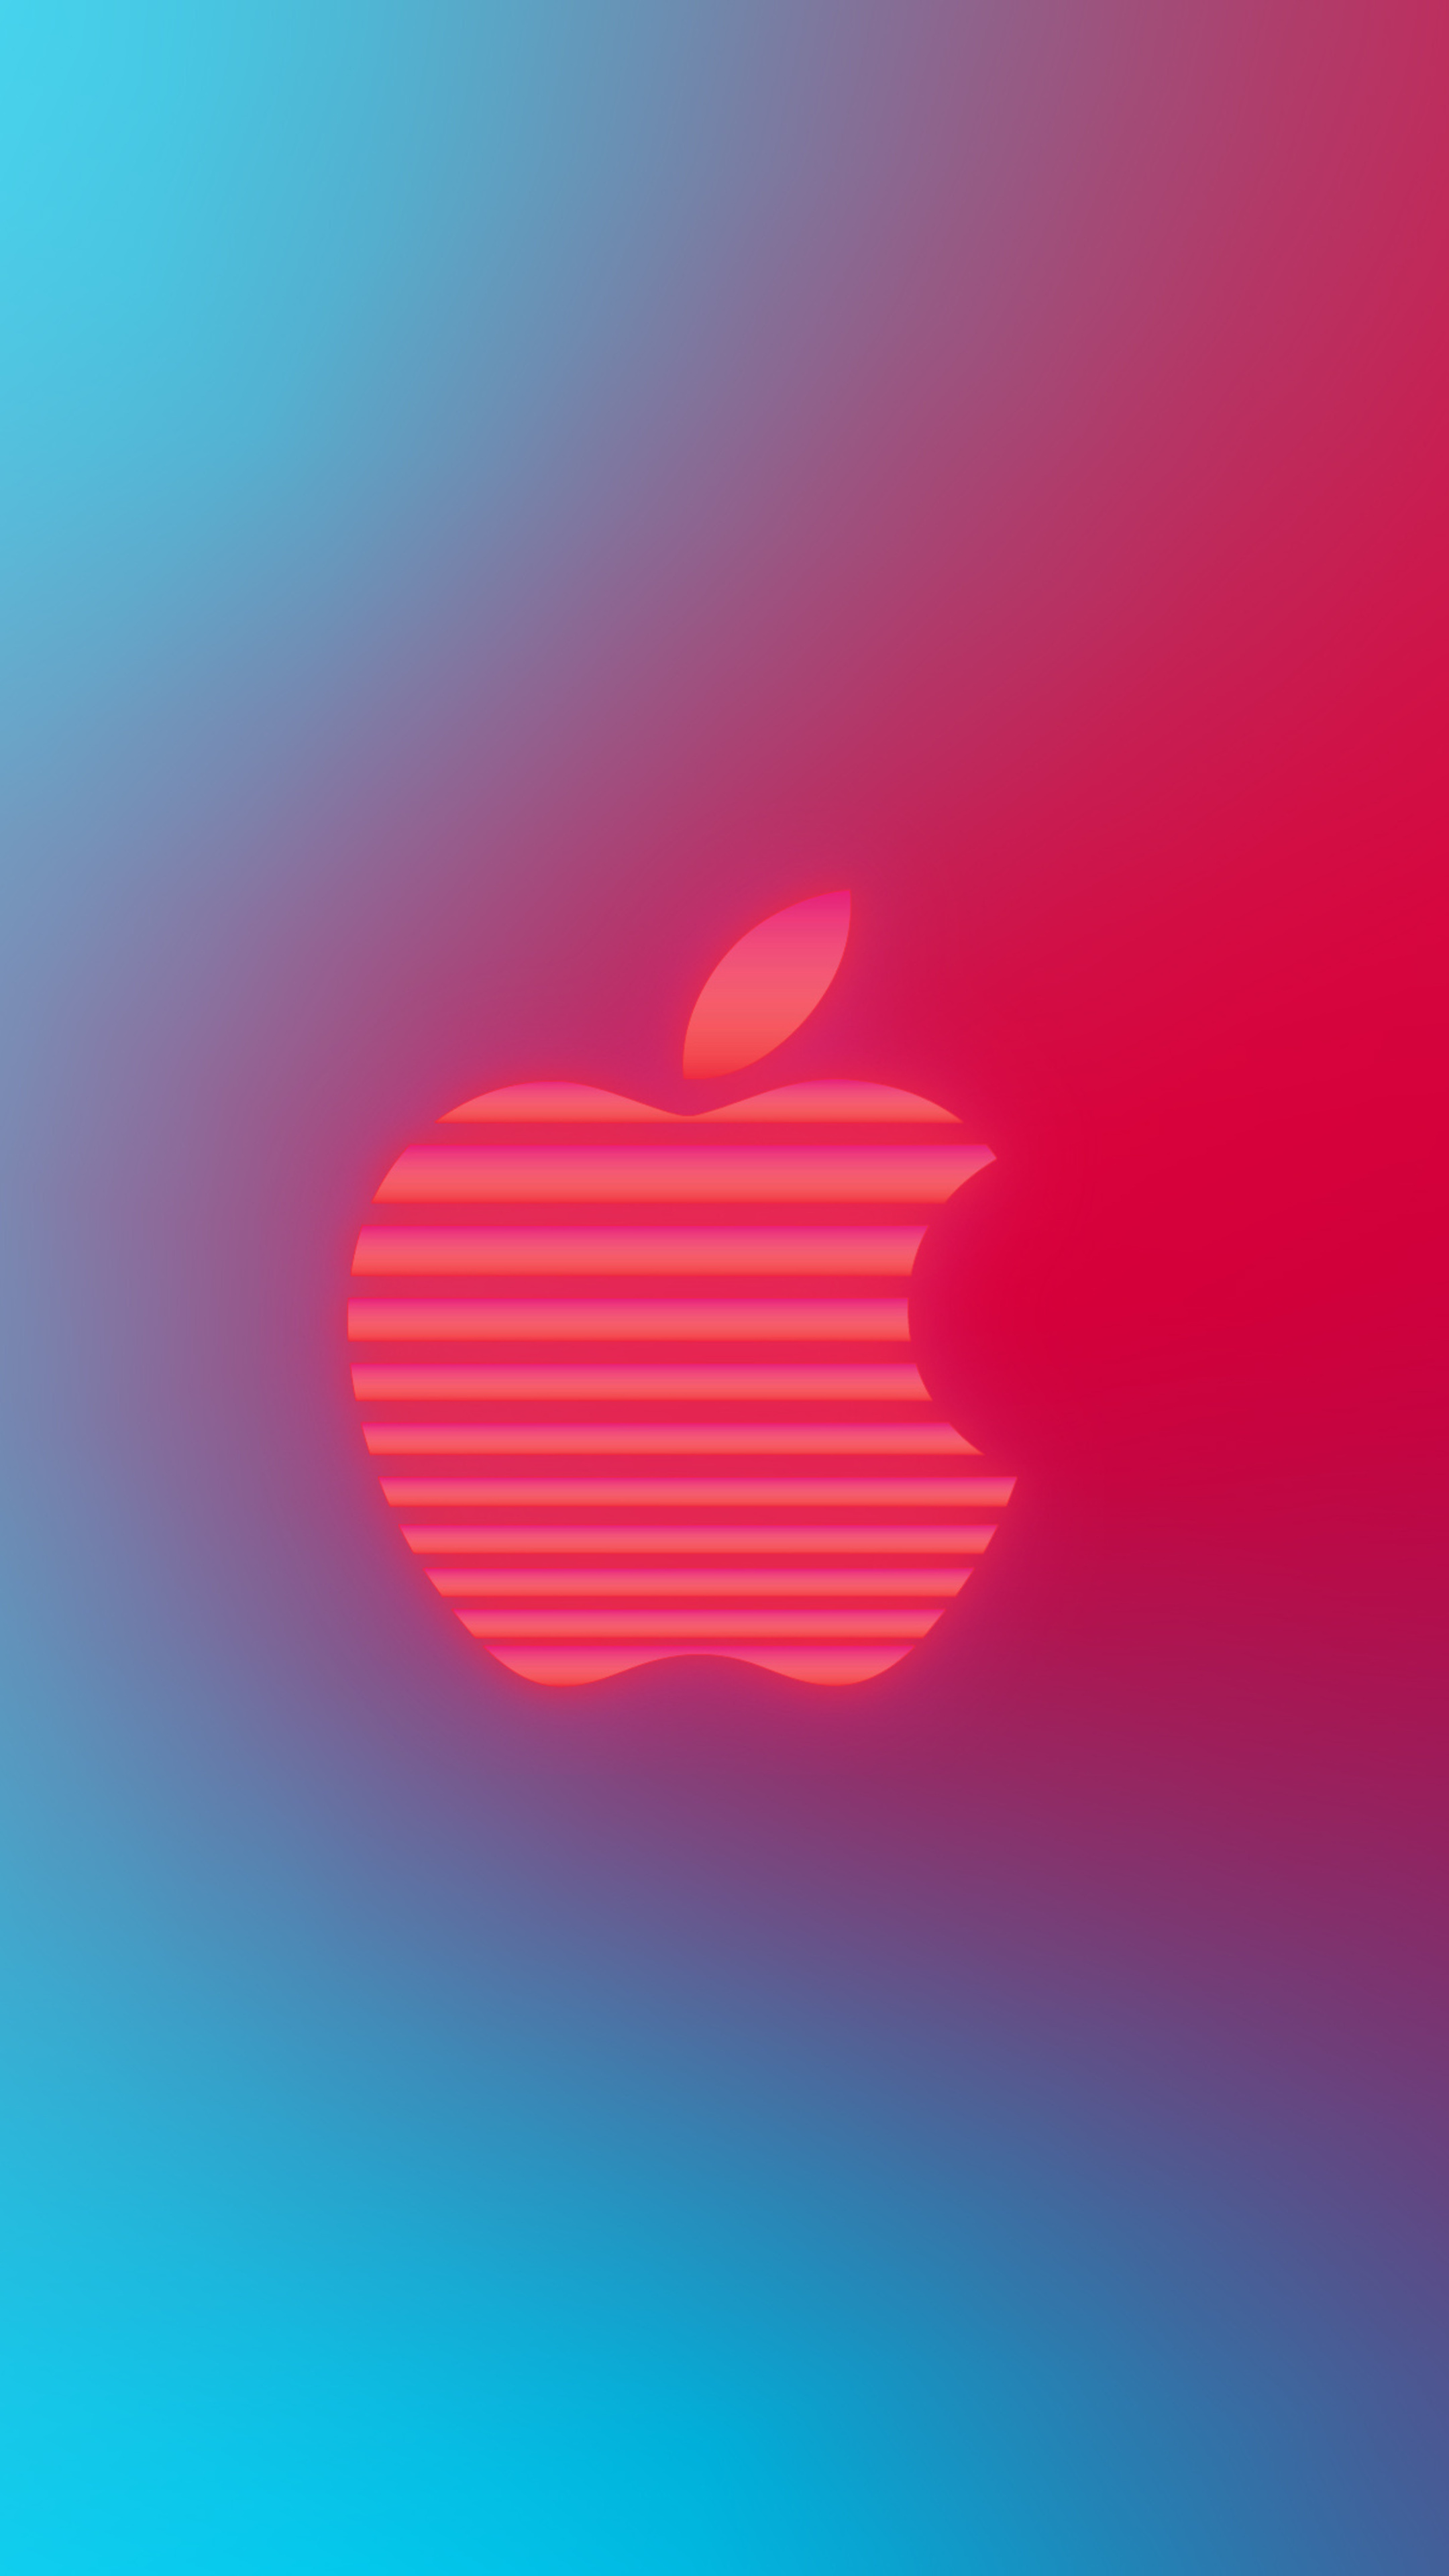 iMac Logo, Apple brand wallpapers, Abstract and colorful, Stylish and modern, 2160x3840 4K Handy